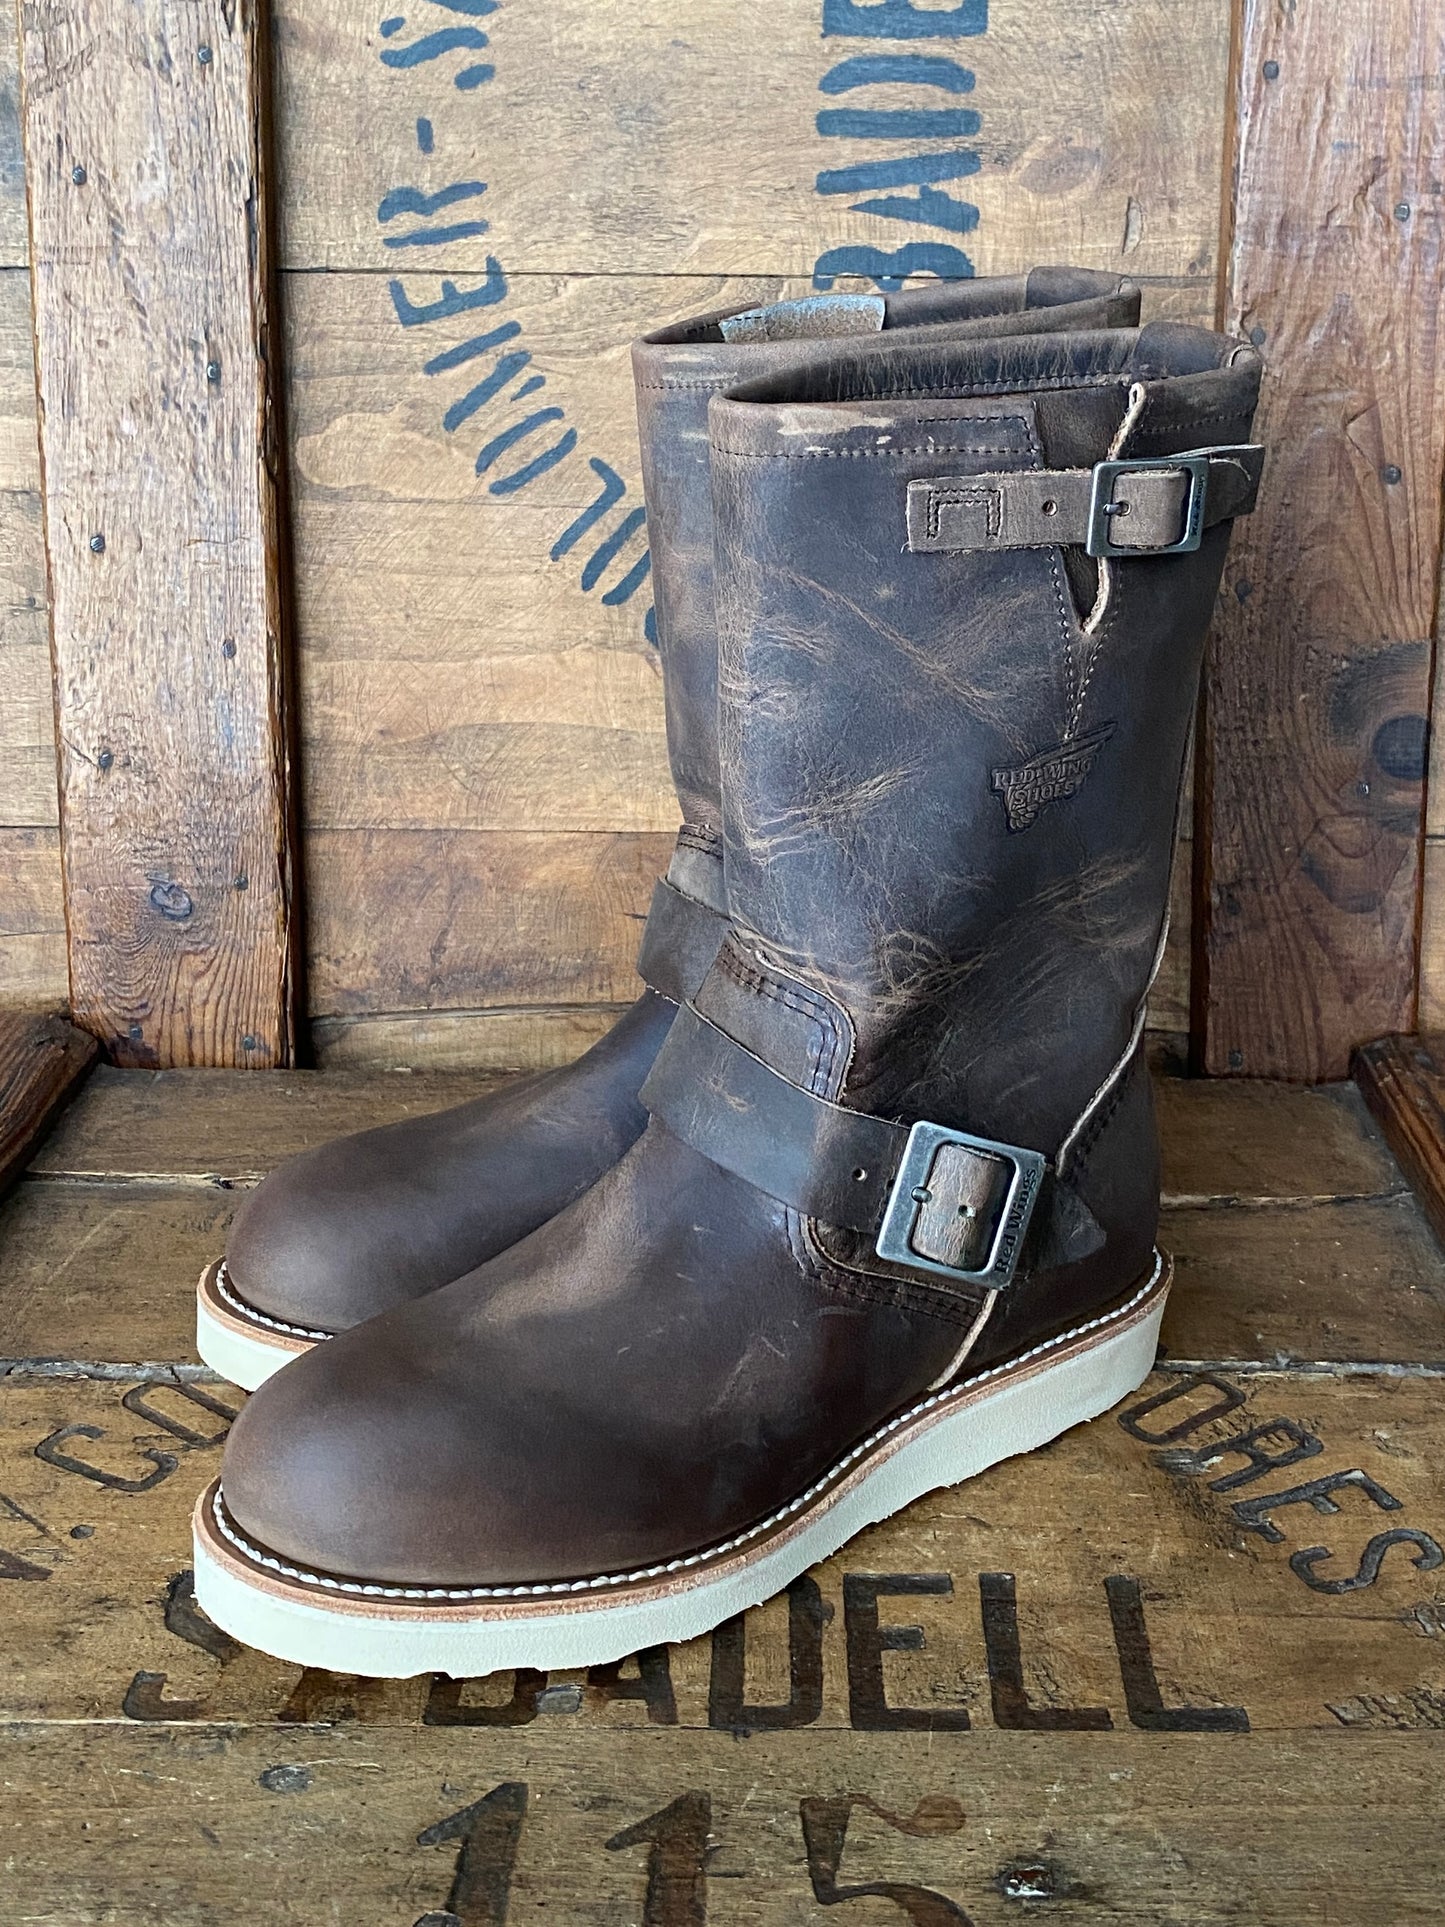 Red Wing 2975 Heritage Engineer Boots, size 7D (39 EU) - front view. Made in USA. Factory seconds.